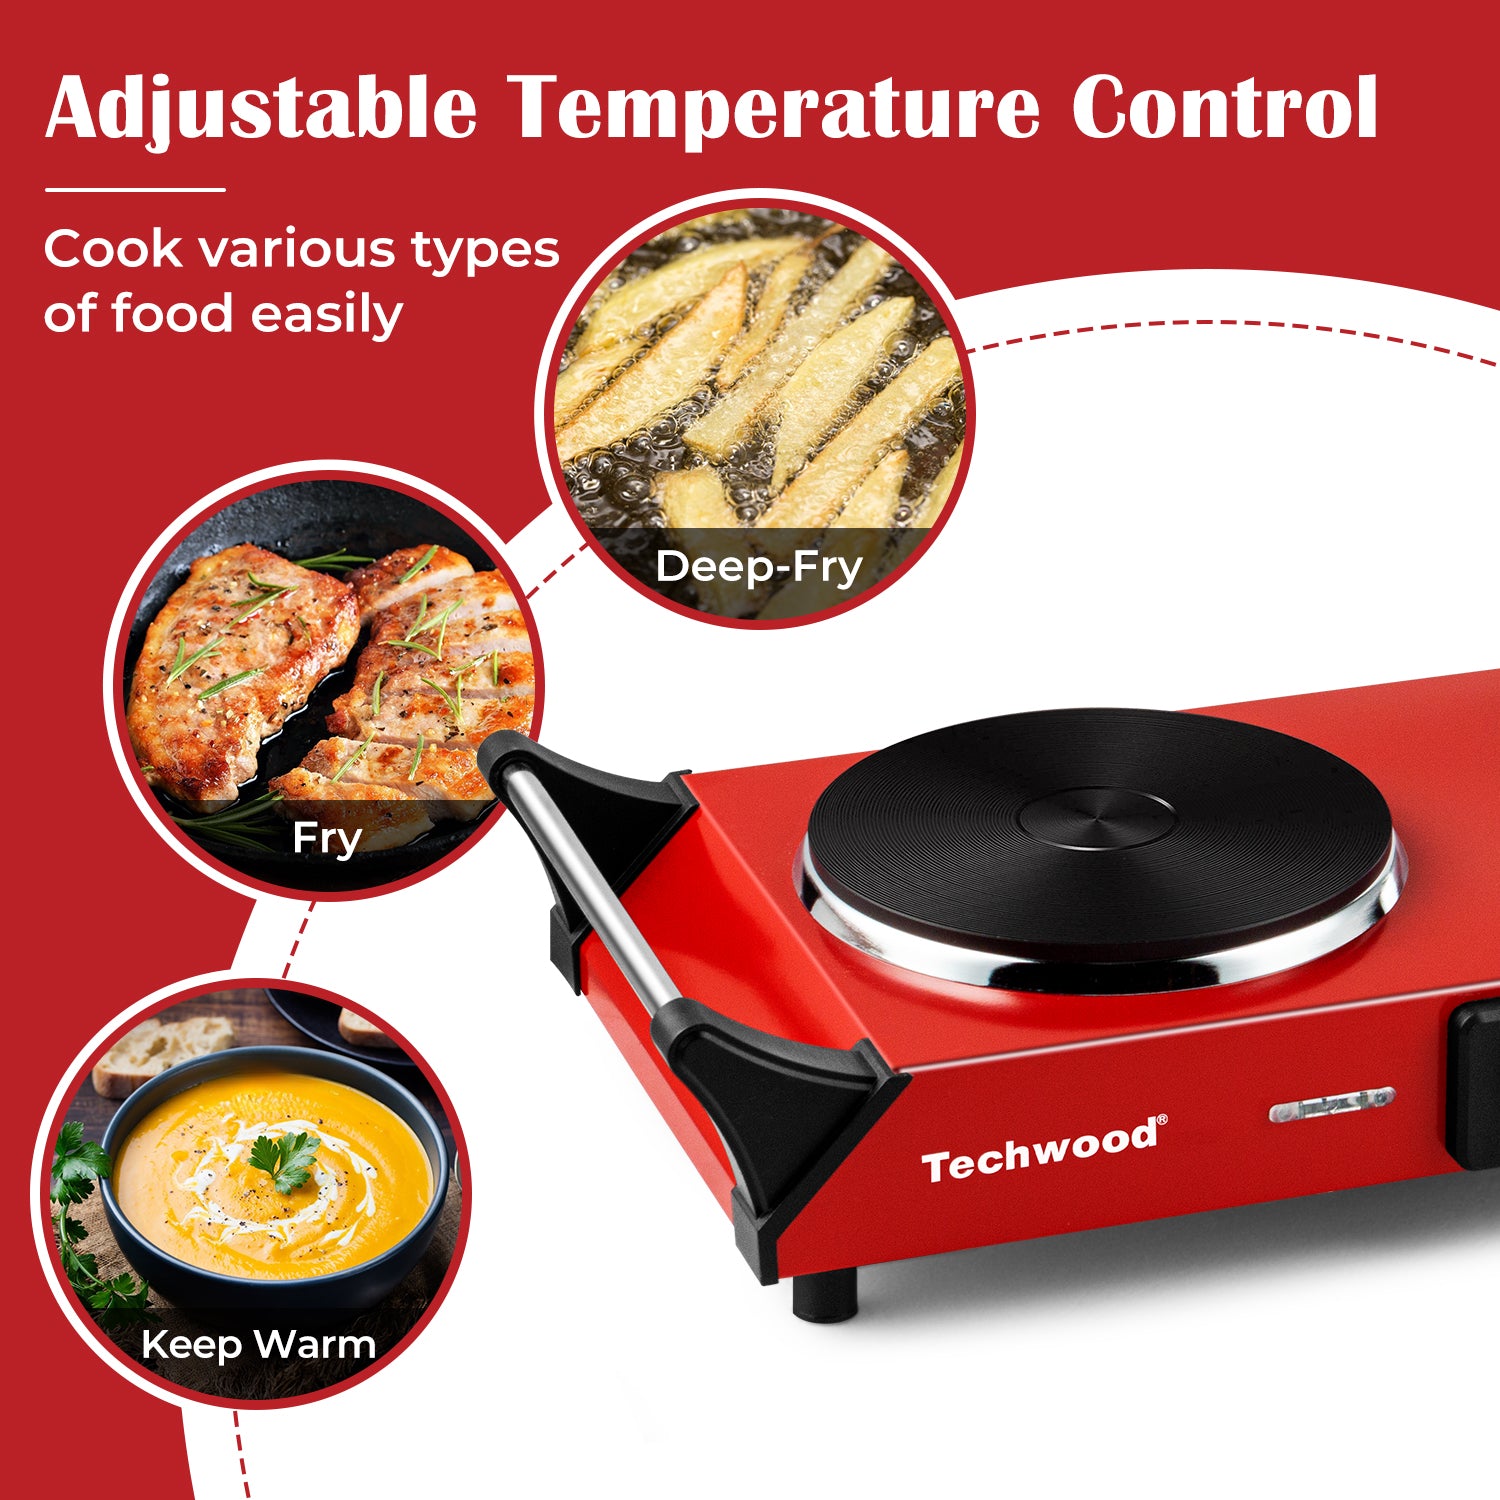 Techwood 1800W Electric Dual Hot Plate, Countertop Stove Double Burner for Cooking, Infrared Ceramic Hot Plates Double Cooktop